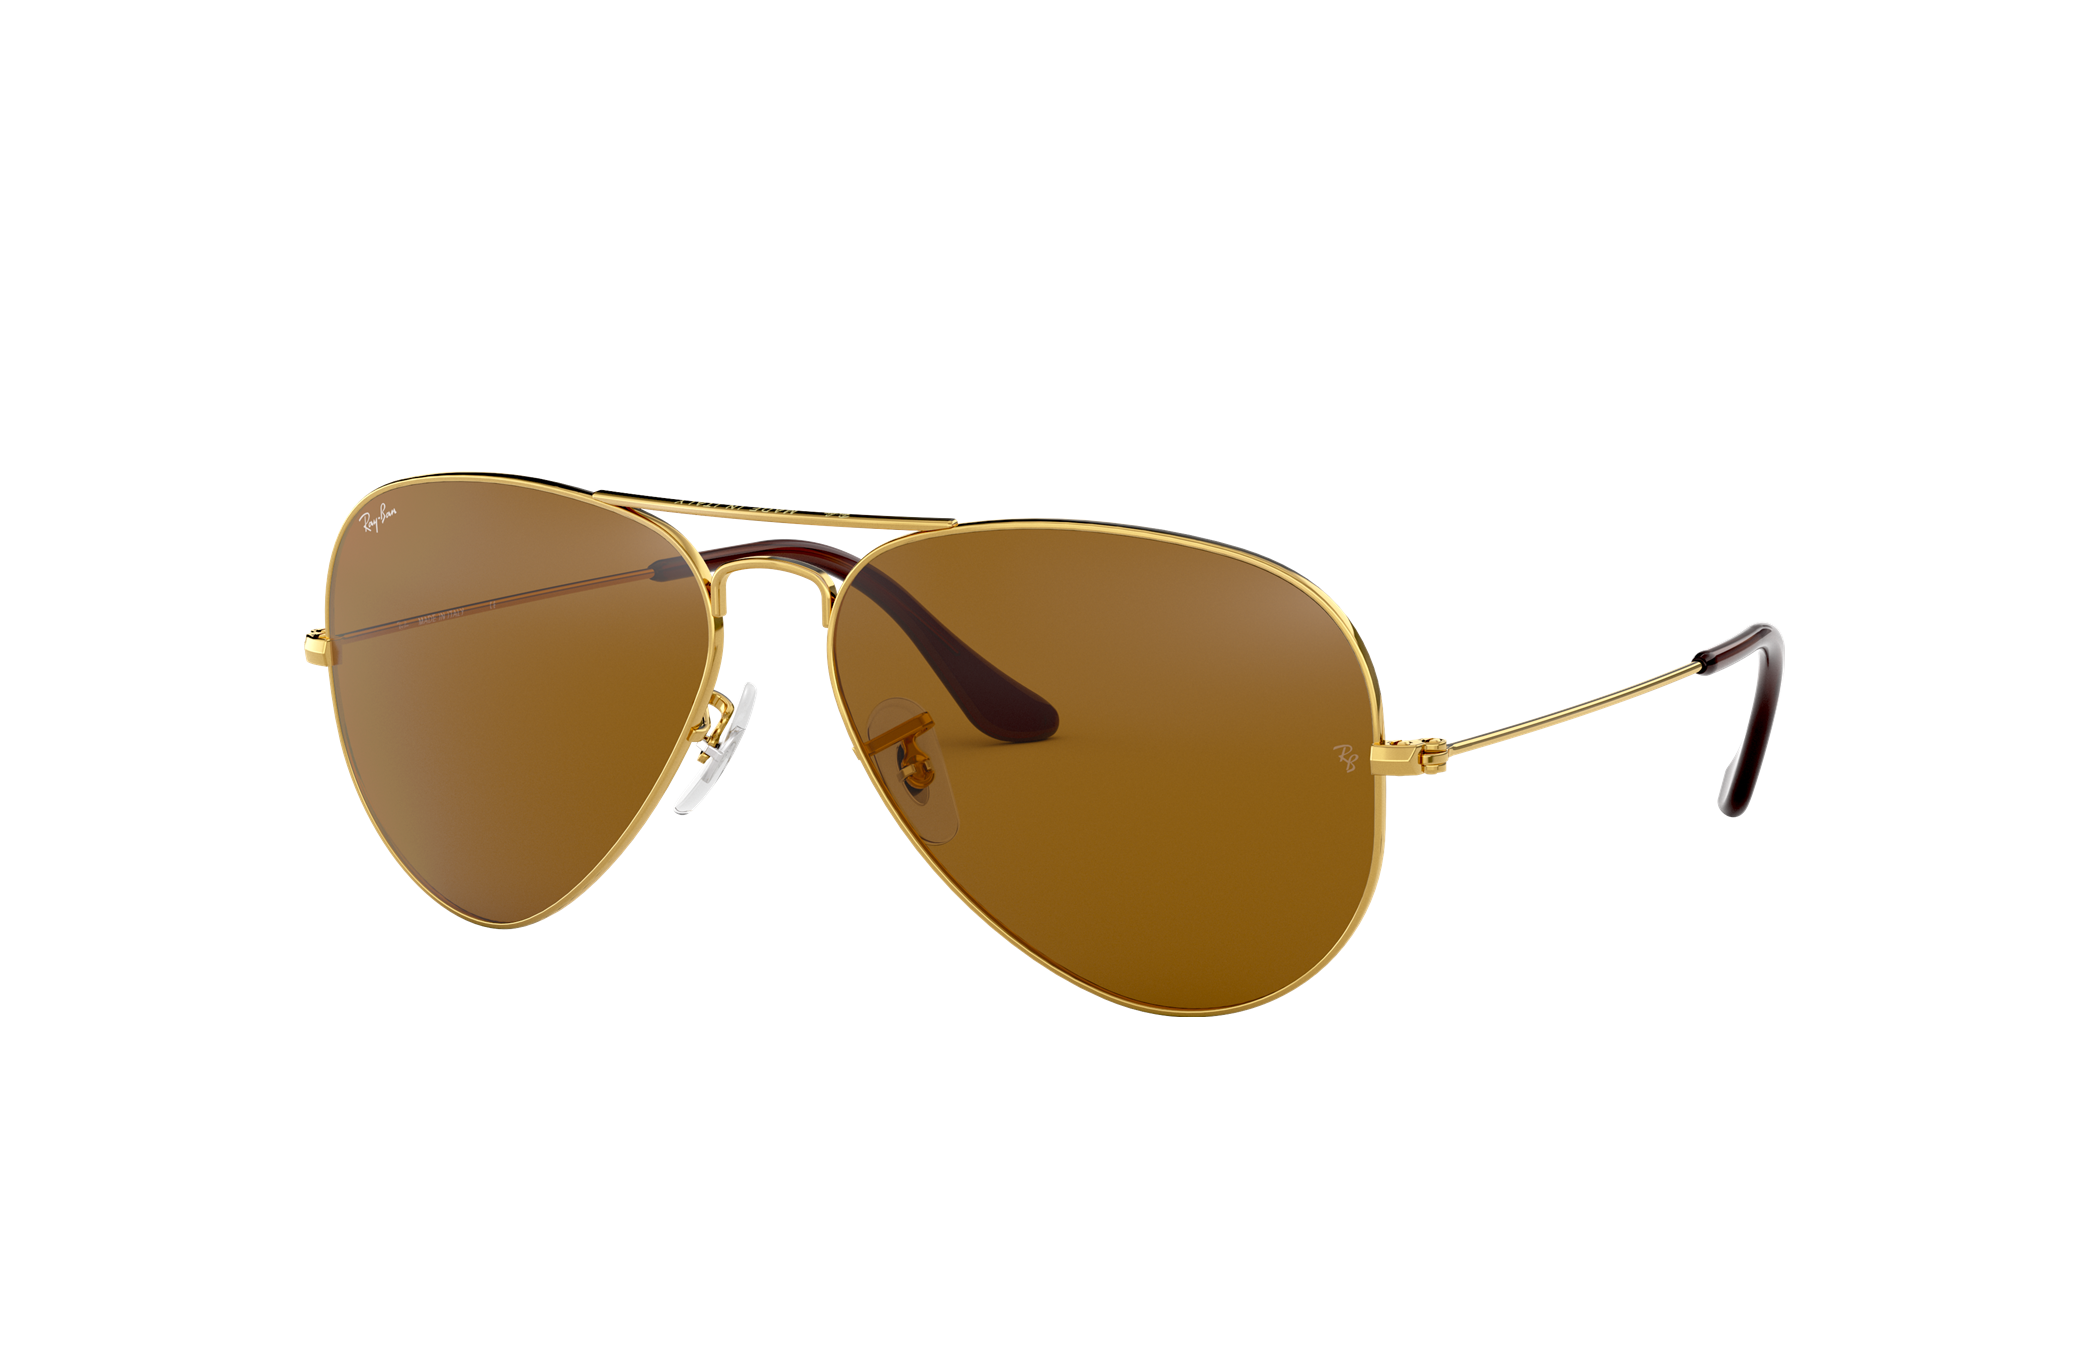 Aviator Classic Sunglasses in Gold and Brown - RB3025 | Ray-Ban® US